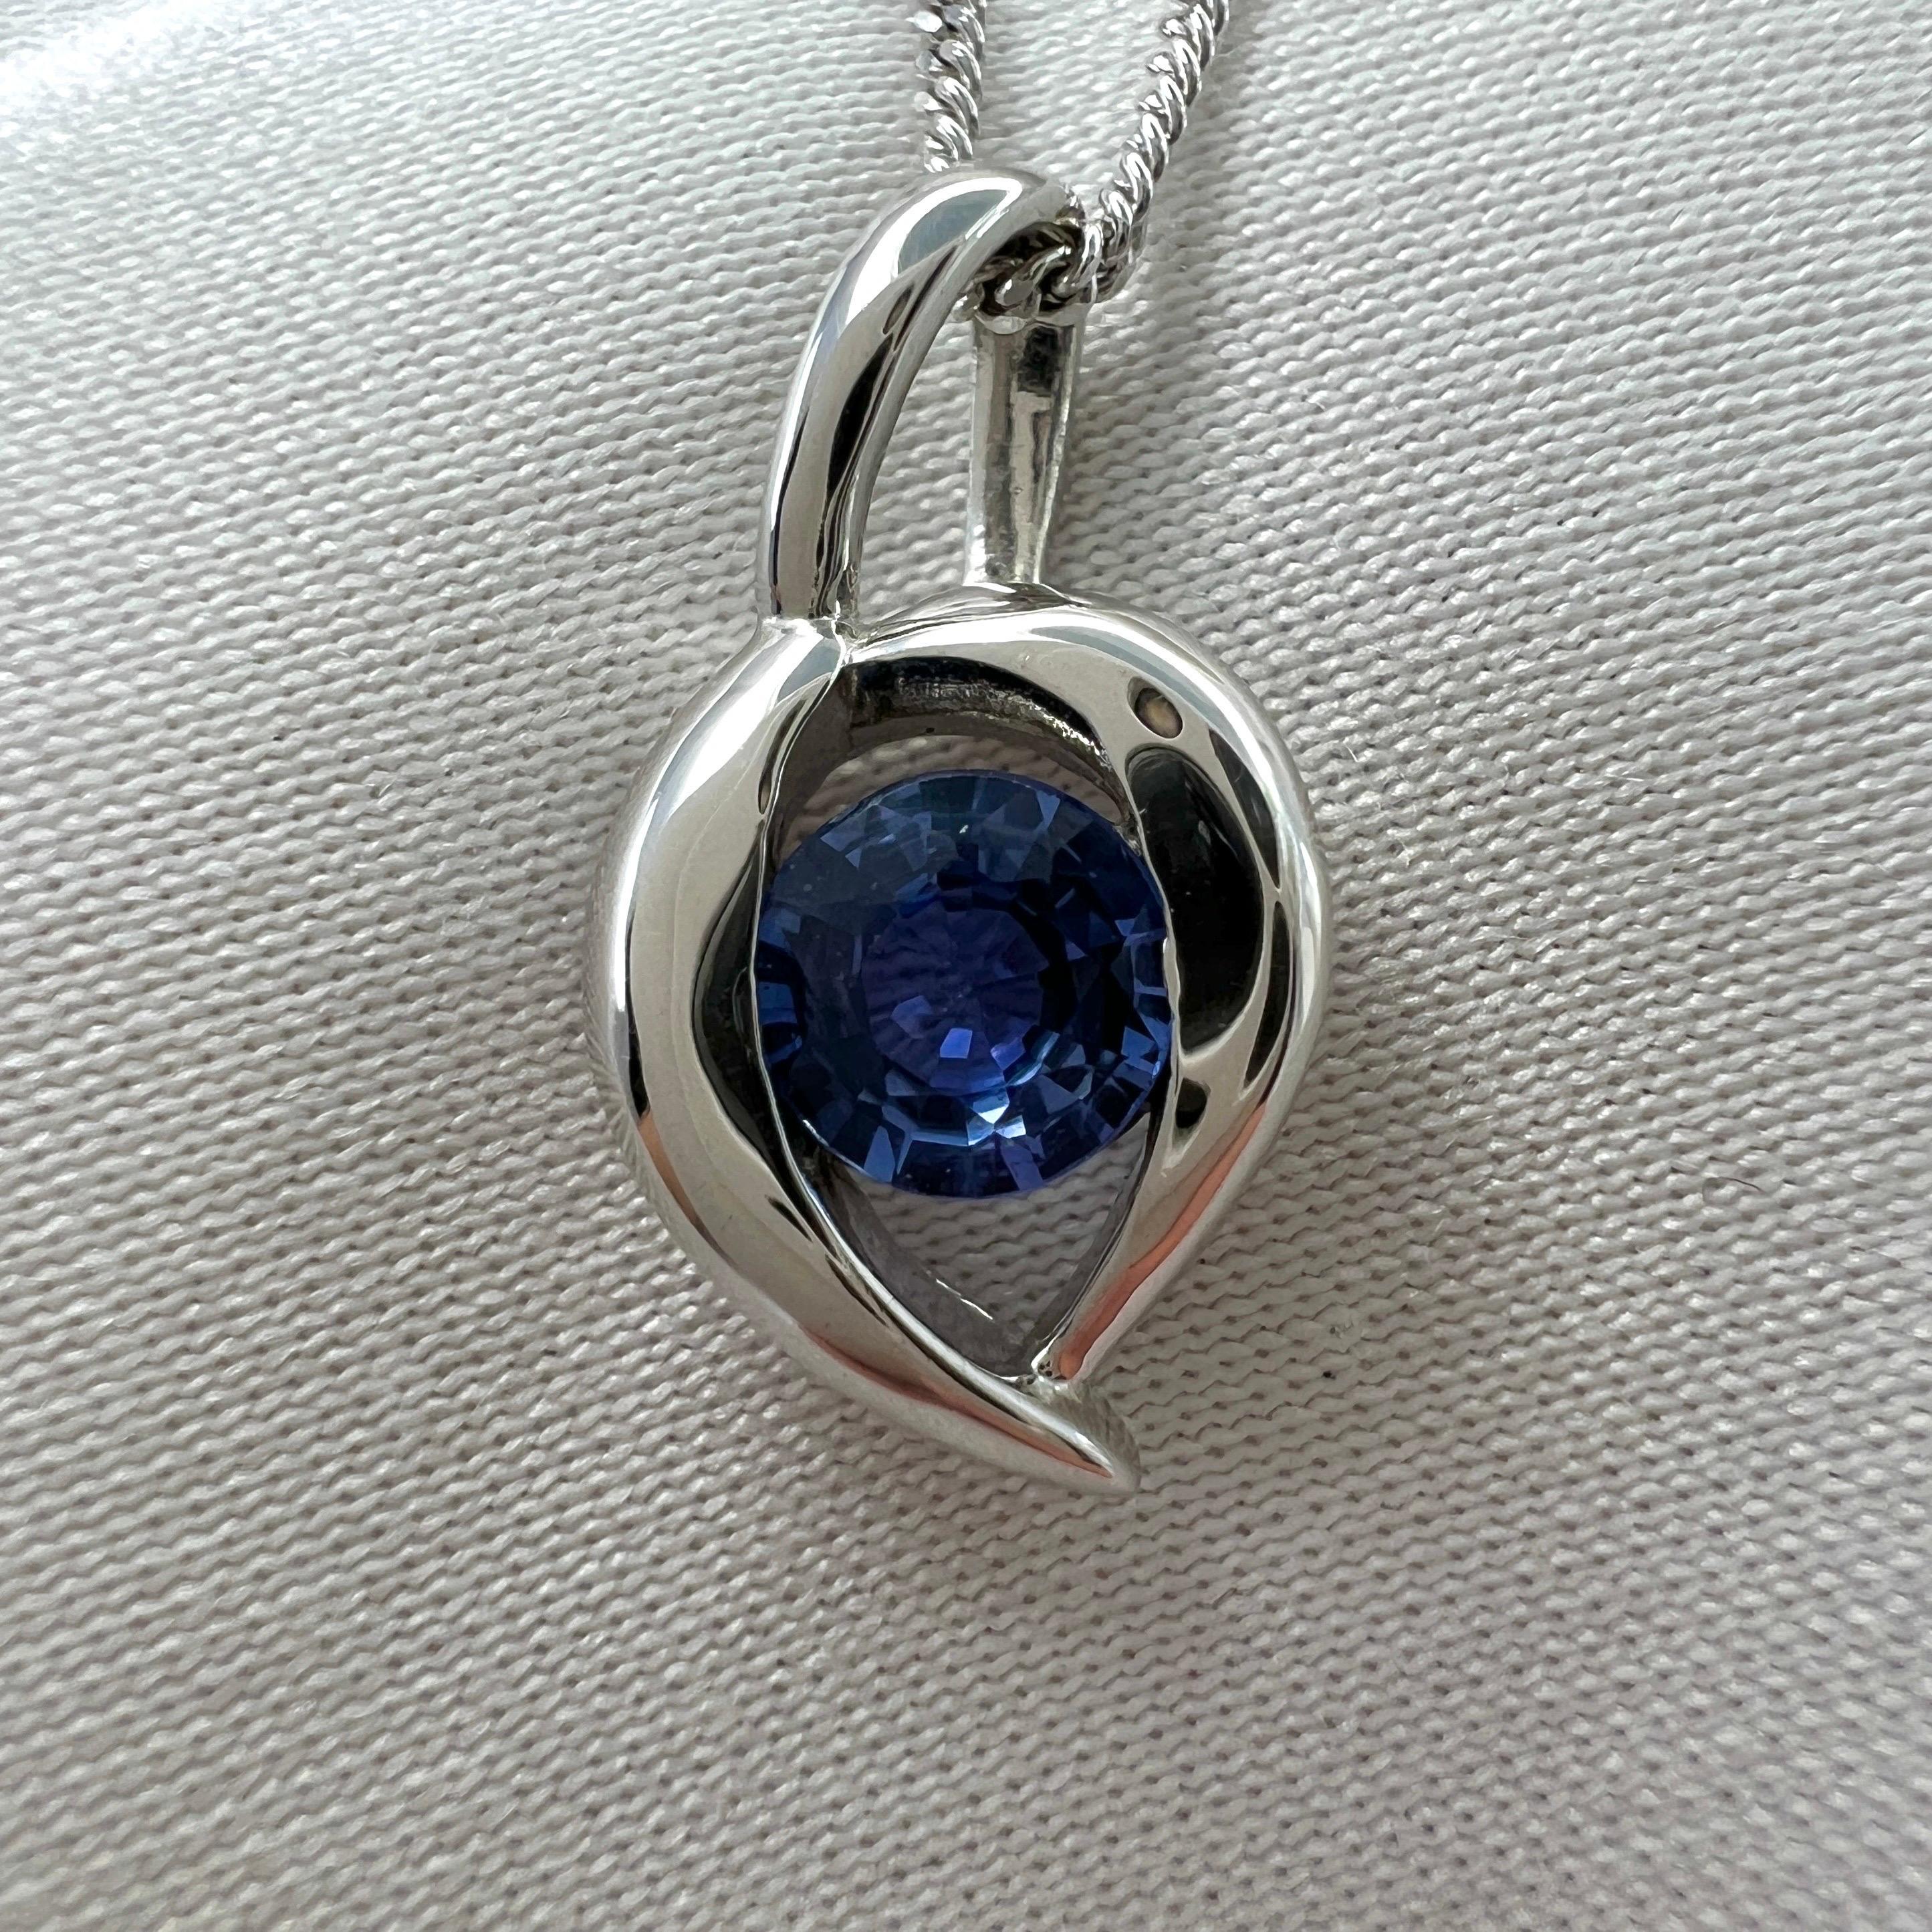 Fine Cornflower Blue Ceylon Sapphire Round Cut 18k White Gold Solitaire Pendant.

0.60 Carat sapphire with a beautiful vivid cornflower blue colour and excellent clarity, very clean stone. Also has an excellent round brilliant cut showing lots of